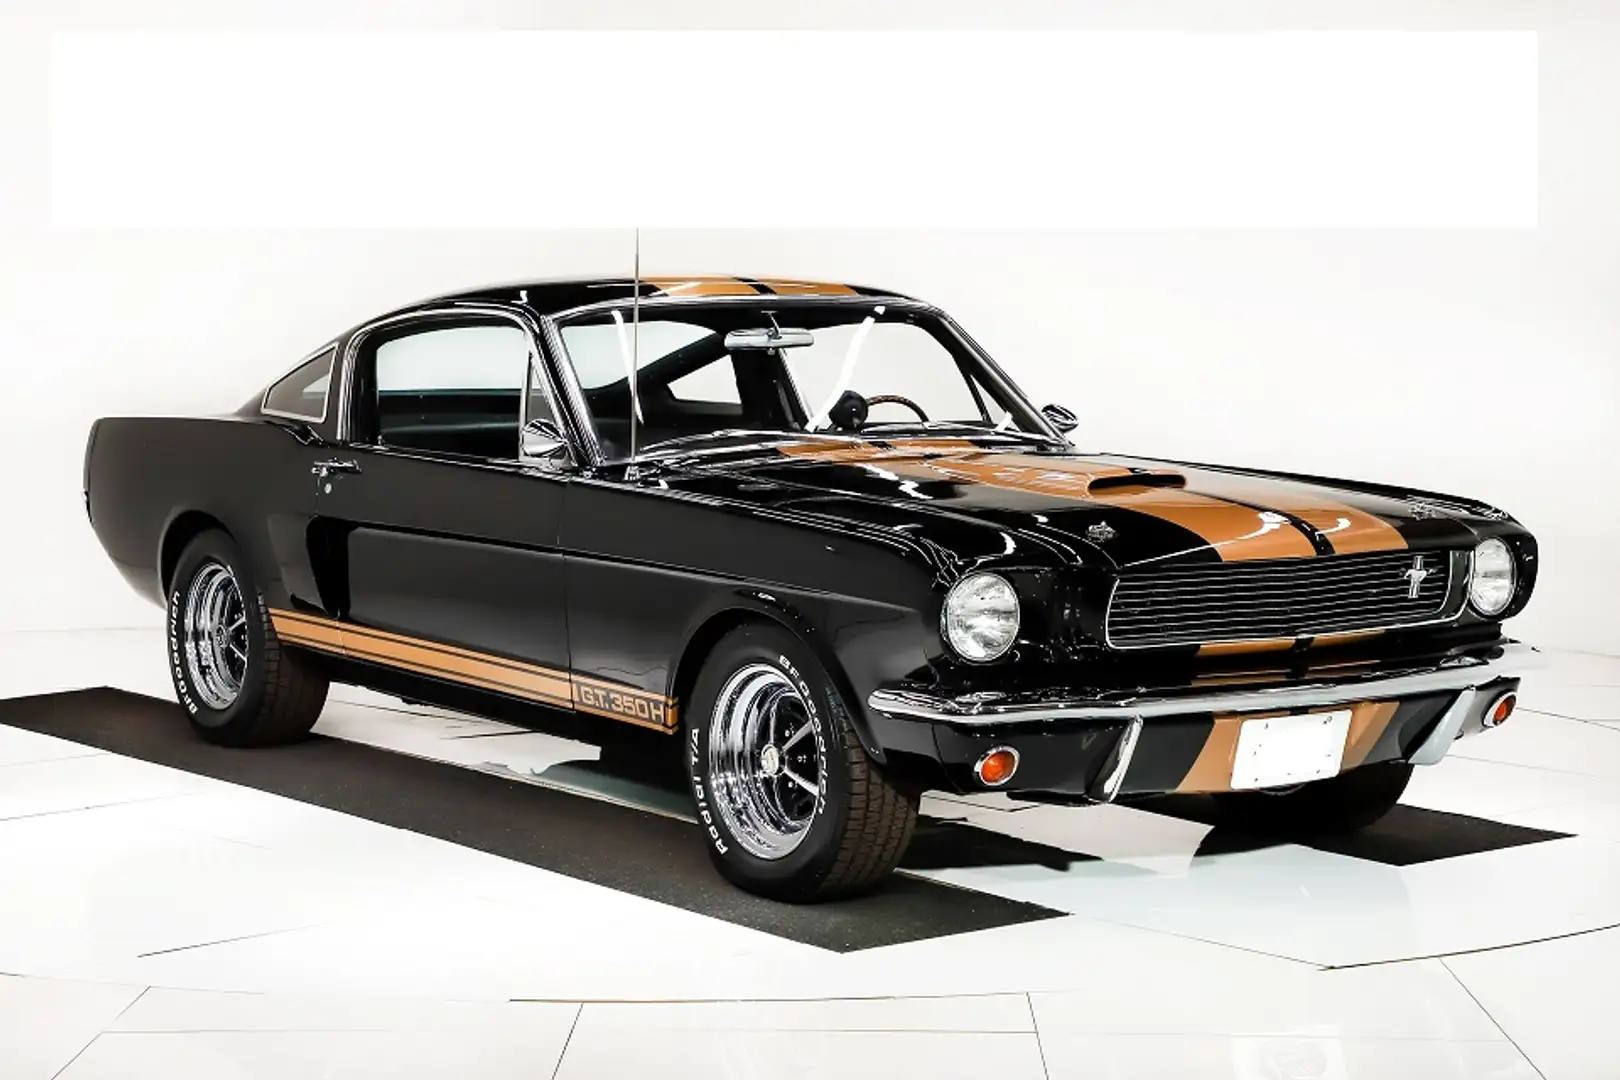 Ford Mustang Shelby Tribute - 1